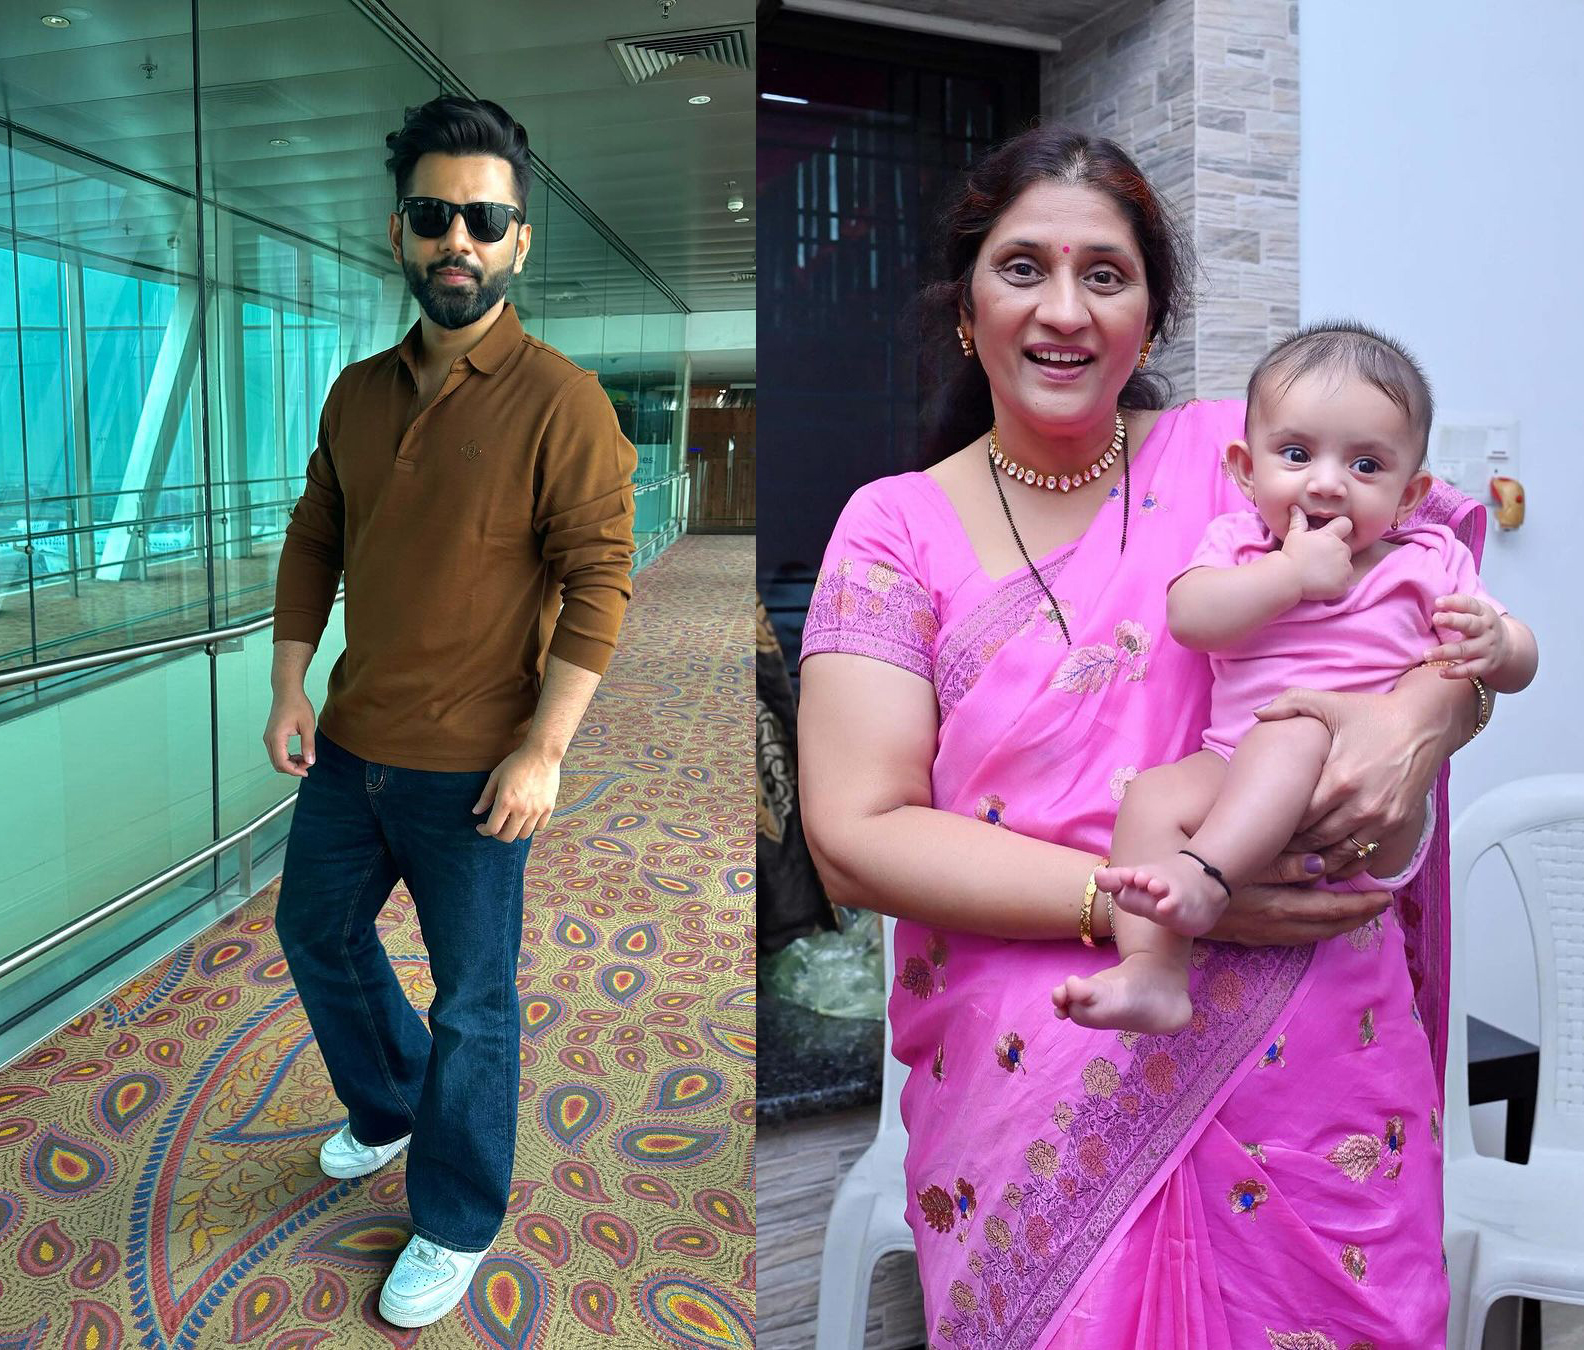 Rahul Vaidya Shares Some Adorable Snaps Of His Cute Baby Girl And Loved Mother On His Social Media. Netizens Shower Their Blessings And Love In The Comments!